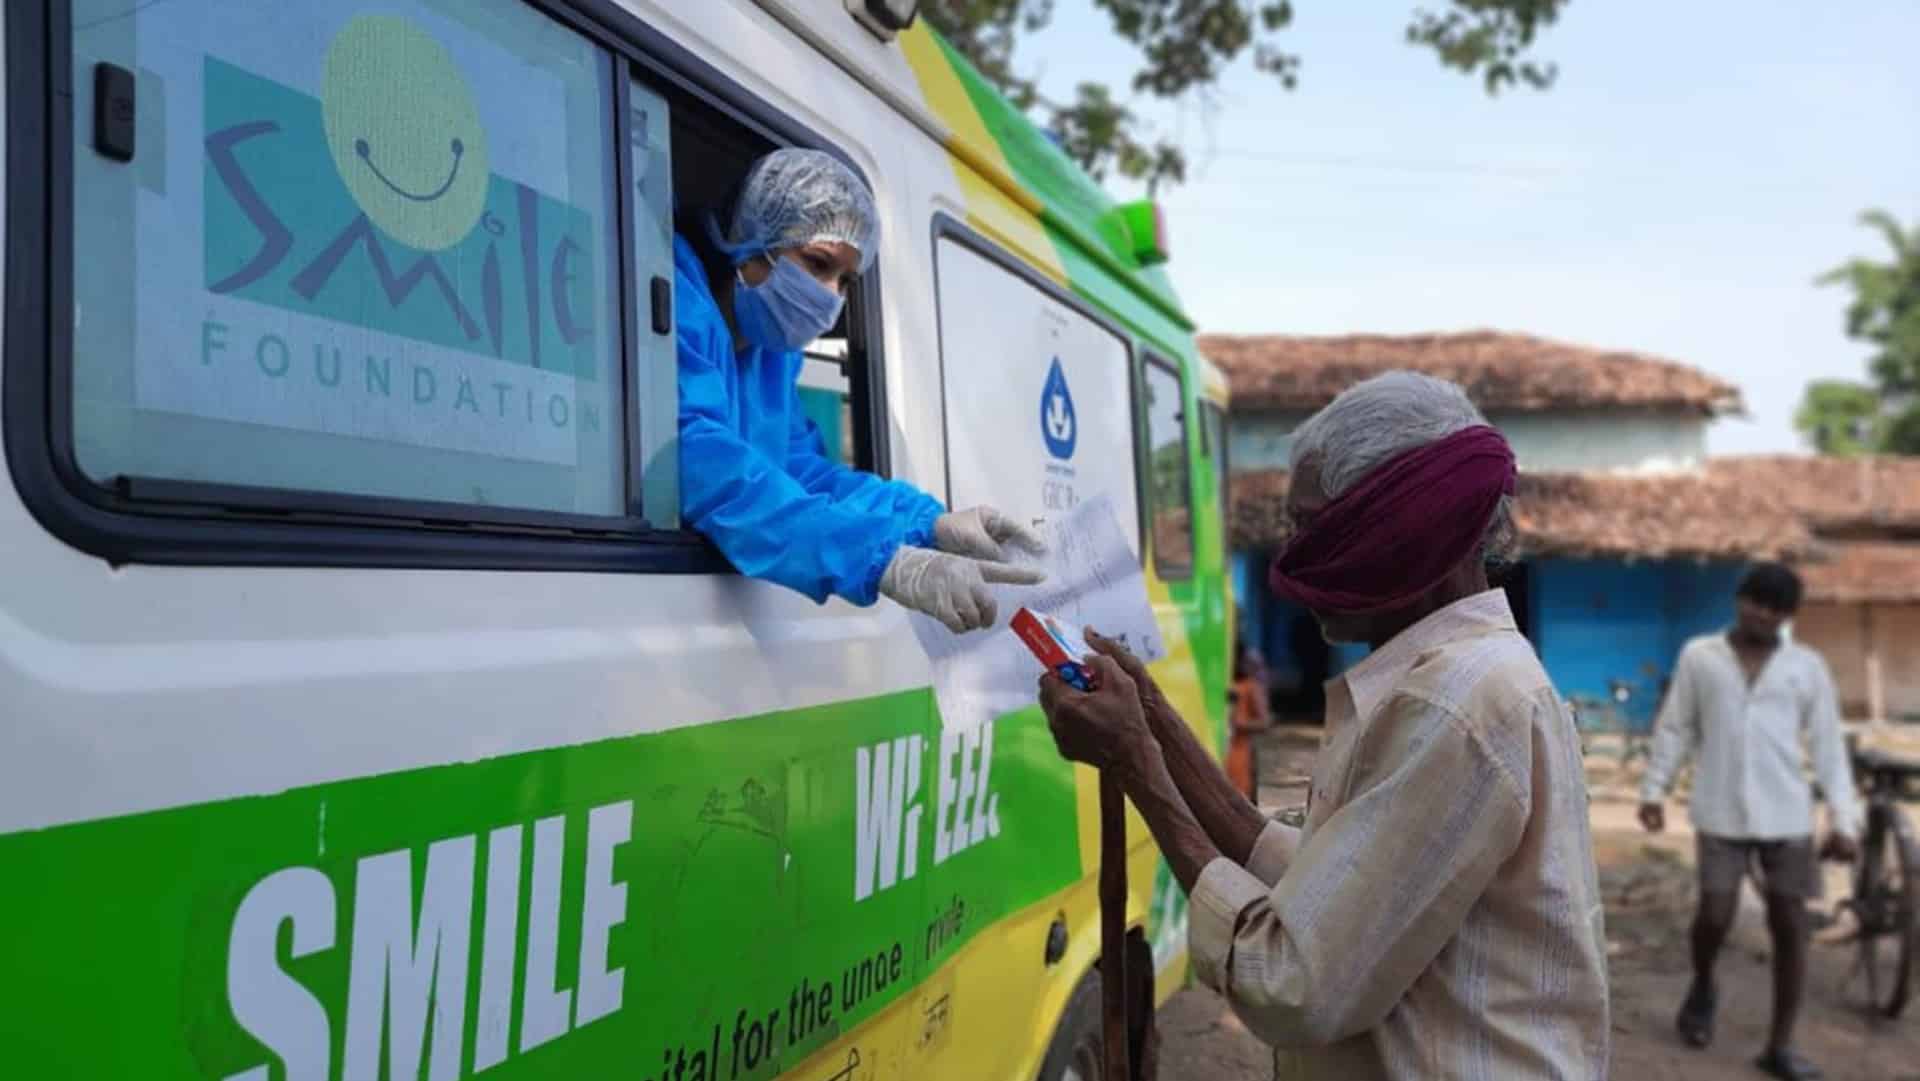 Smile Foundation's new campaign aims to provide 1 million protective kits to frontline health workers